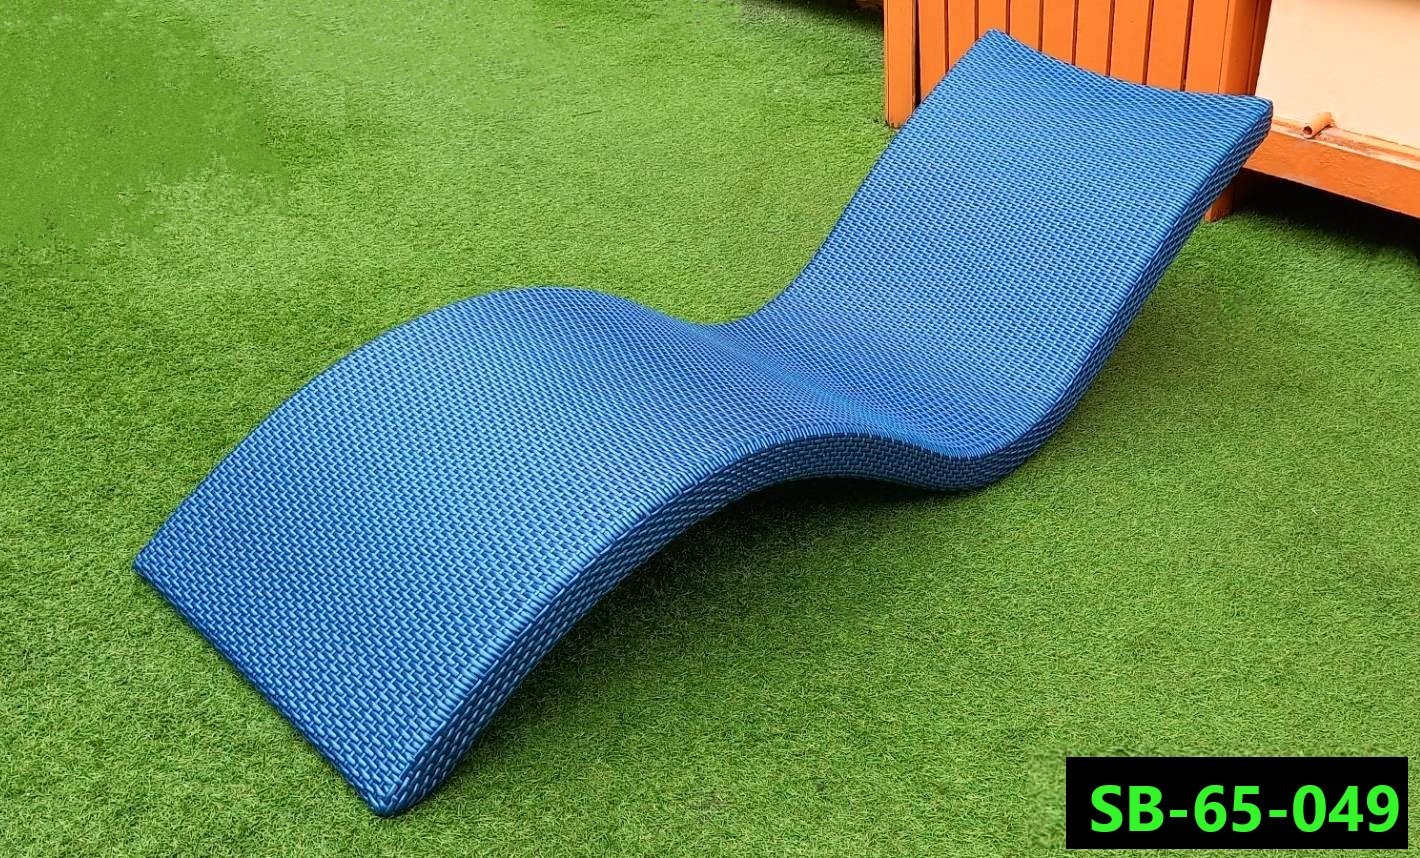 Rattan Sun Lounger/Bed Product code SB-65-049